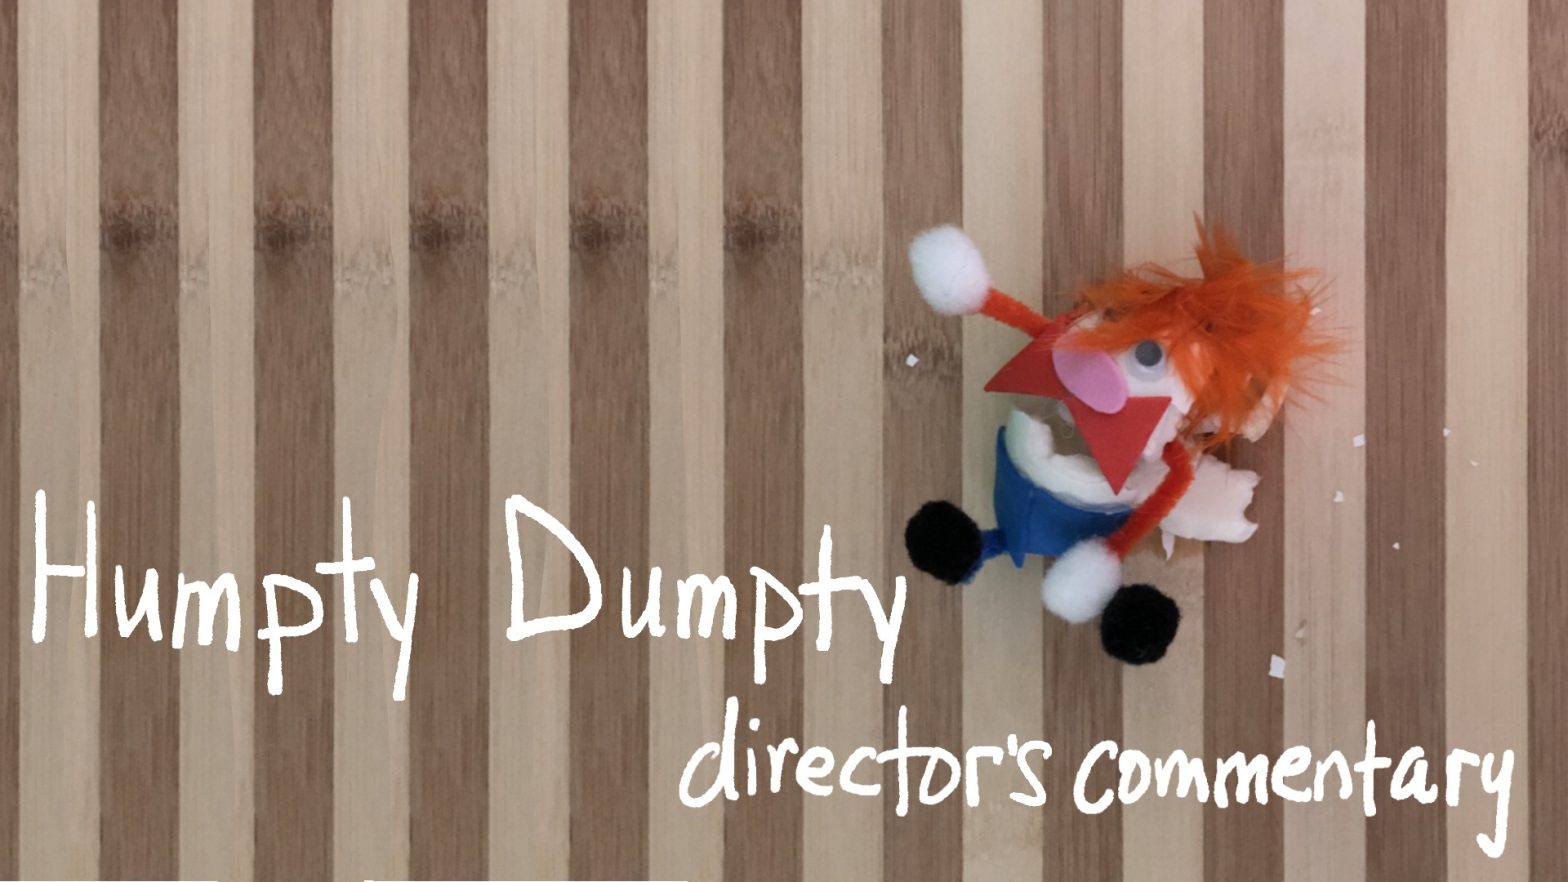 Humpty Dumpty – director’s commentary